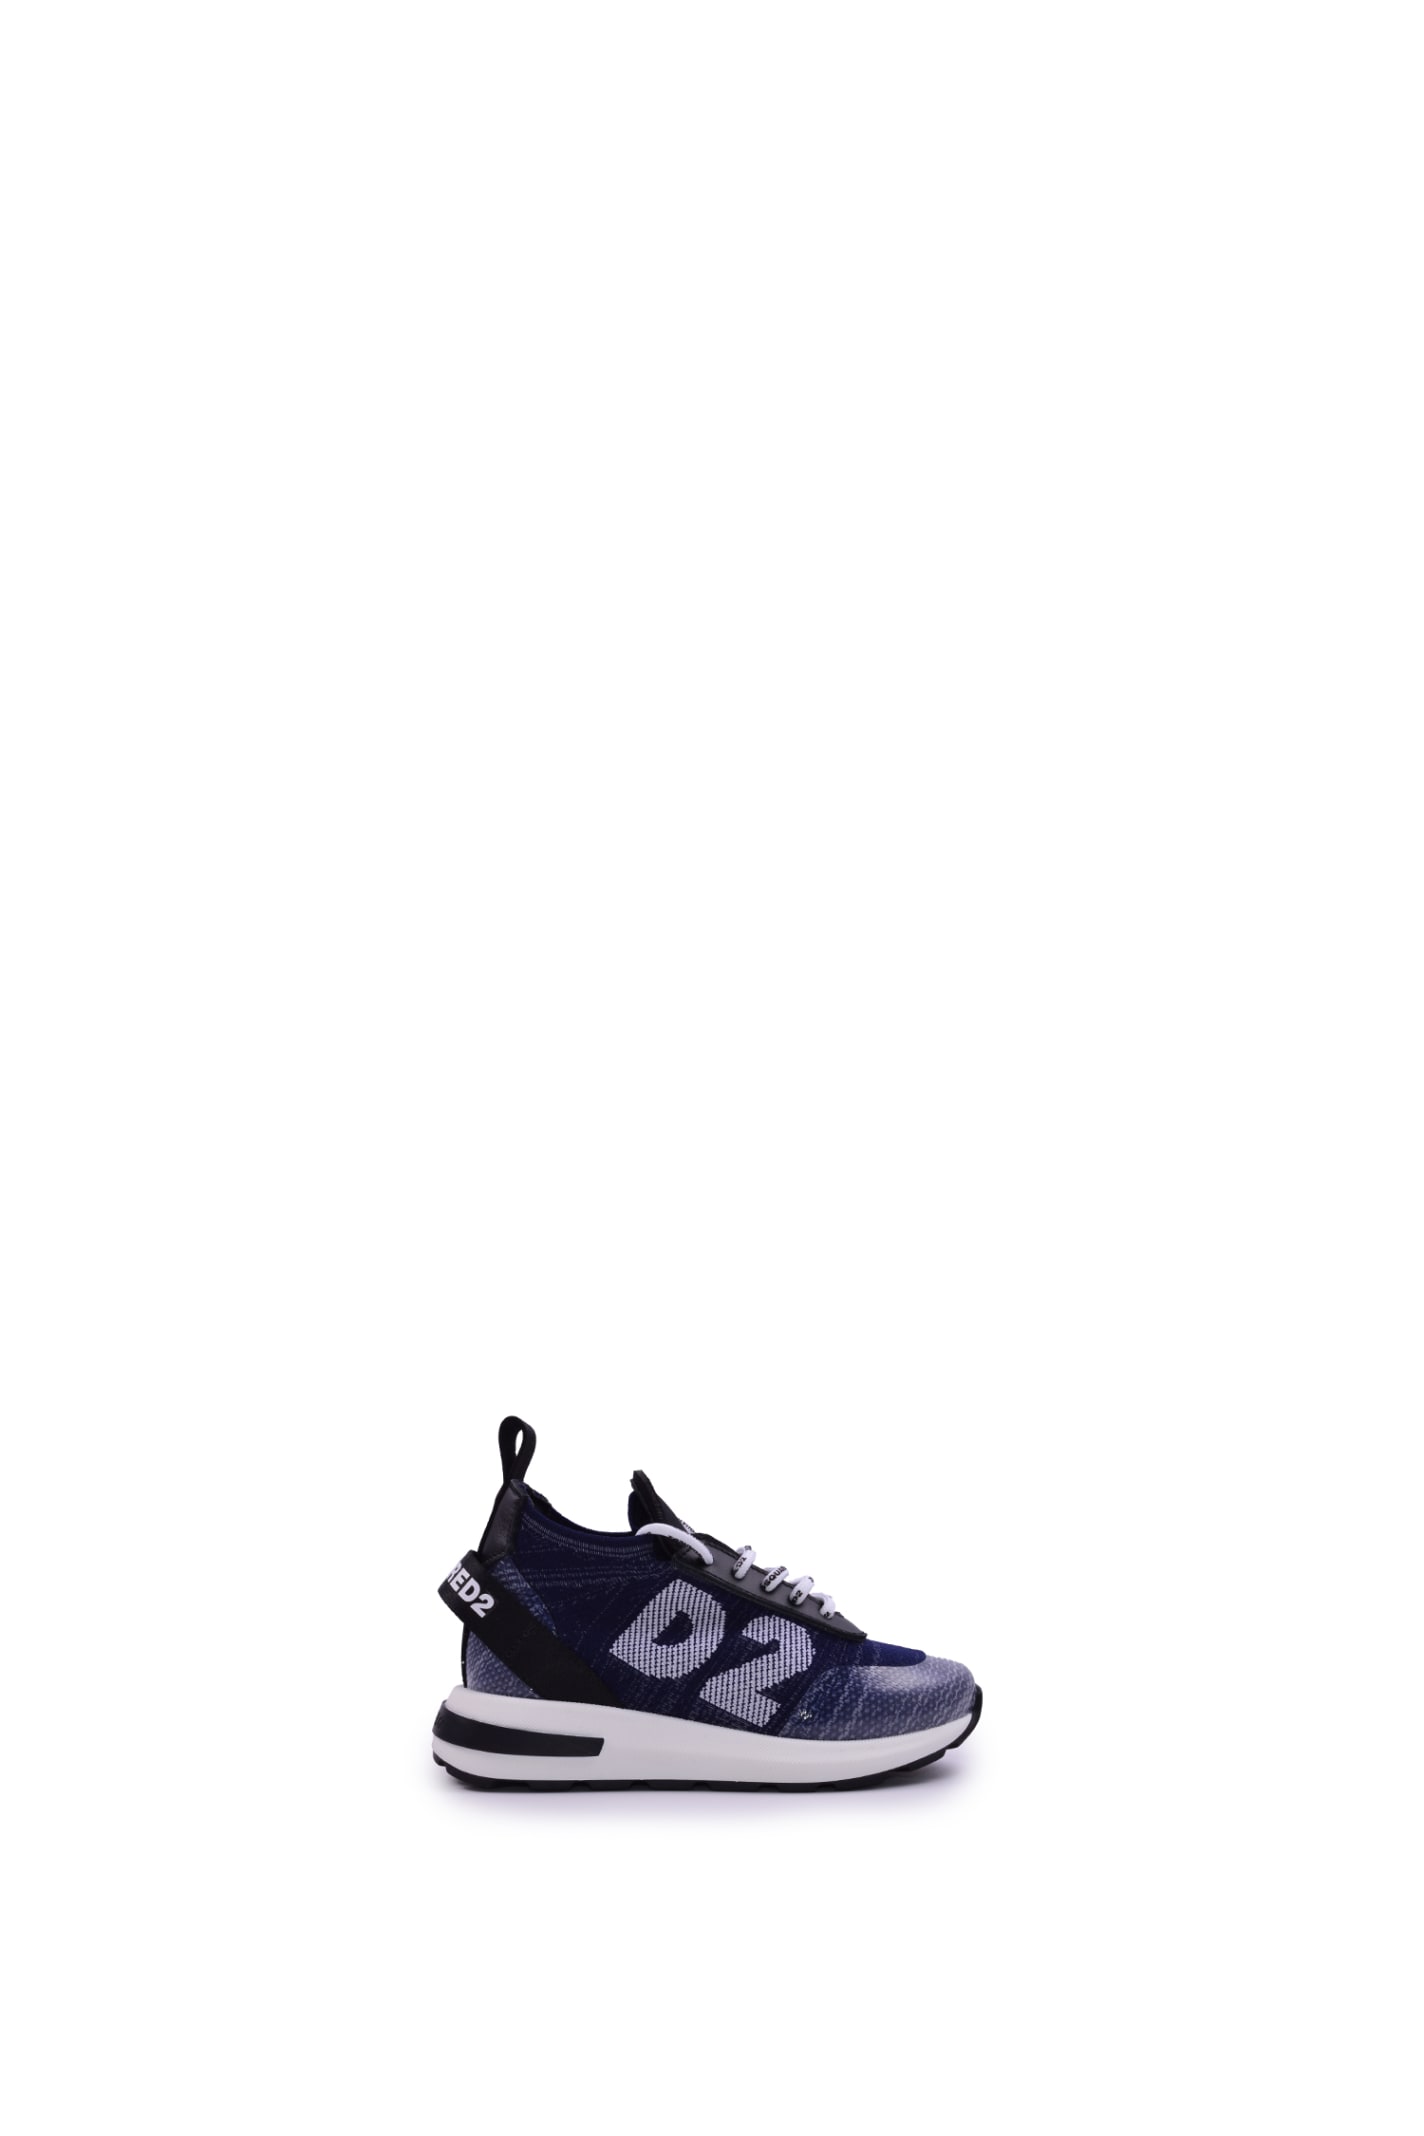 Dsquared2 Stretch Nylon Knit Sneakers